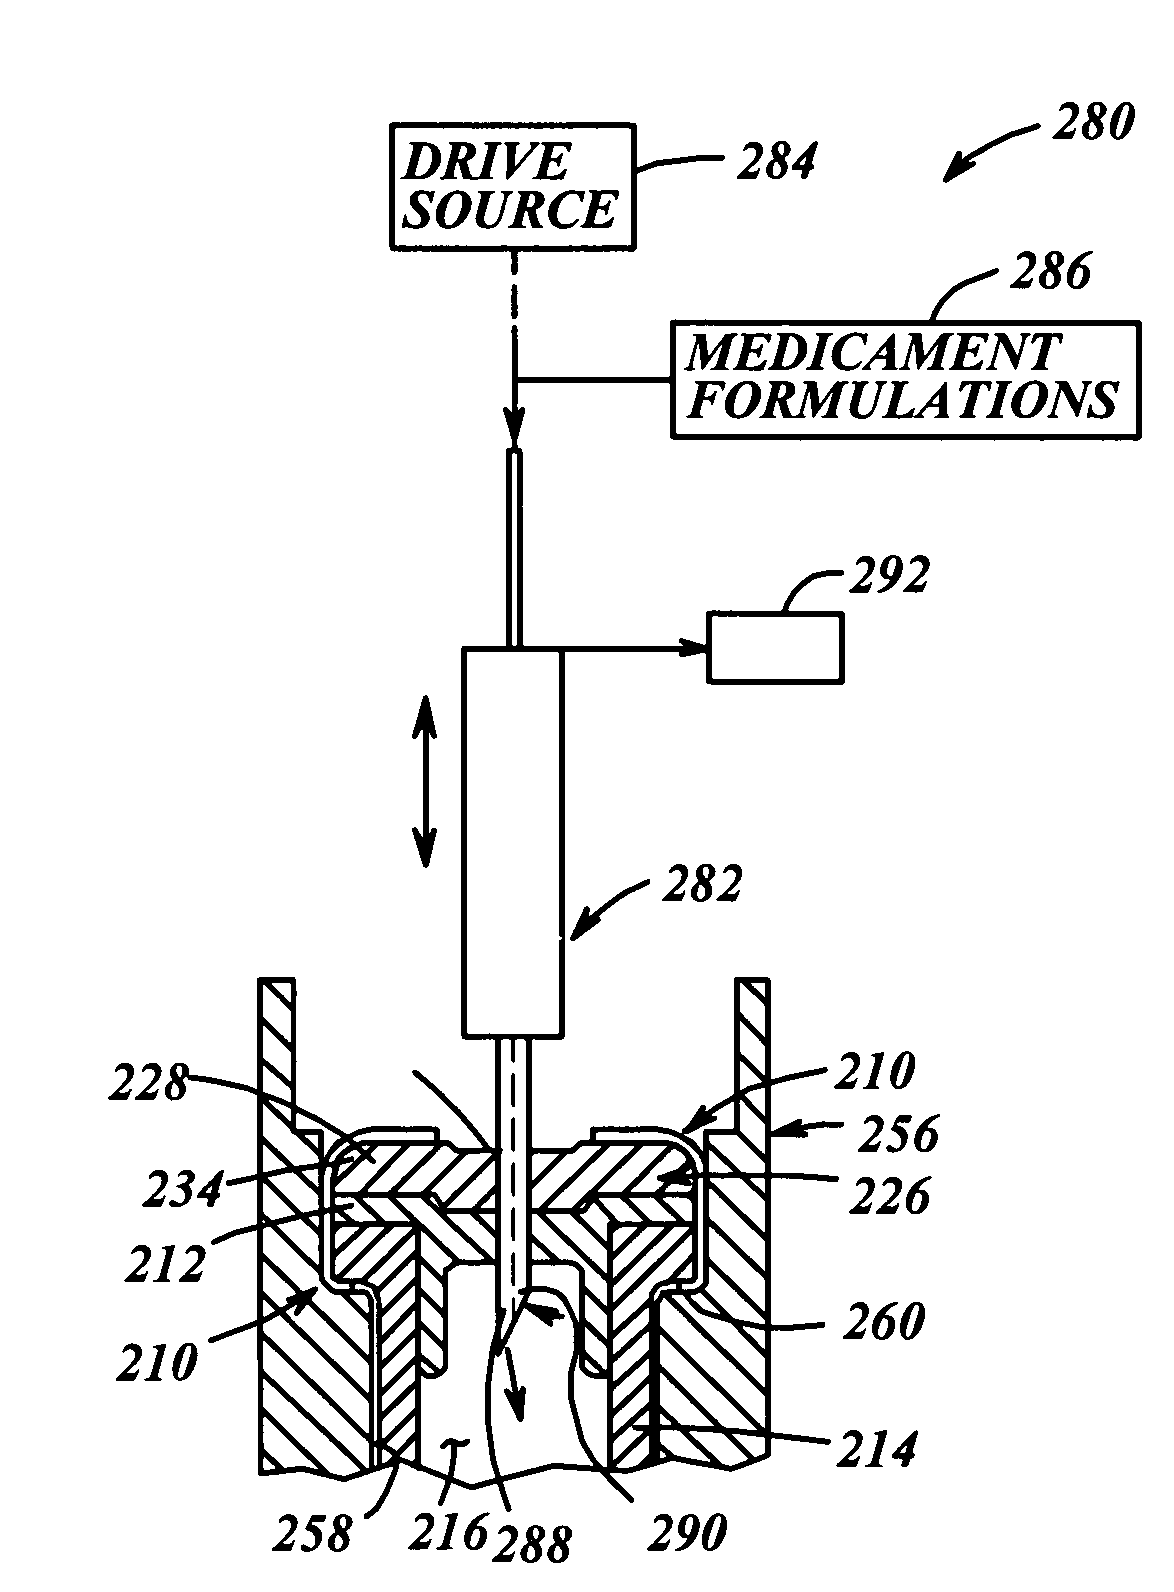 Medicament vial having a heat-sealable cap, and apparatus and method for filling the vial